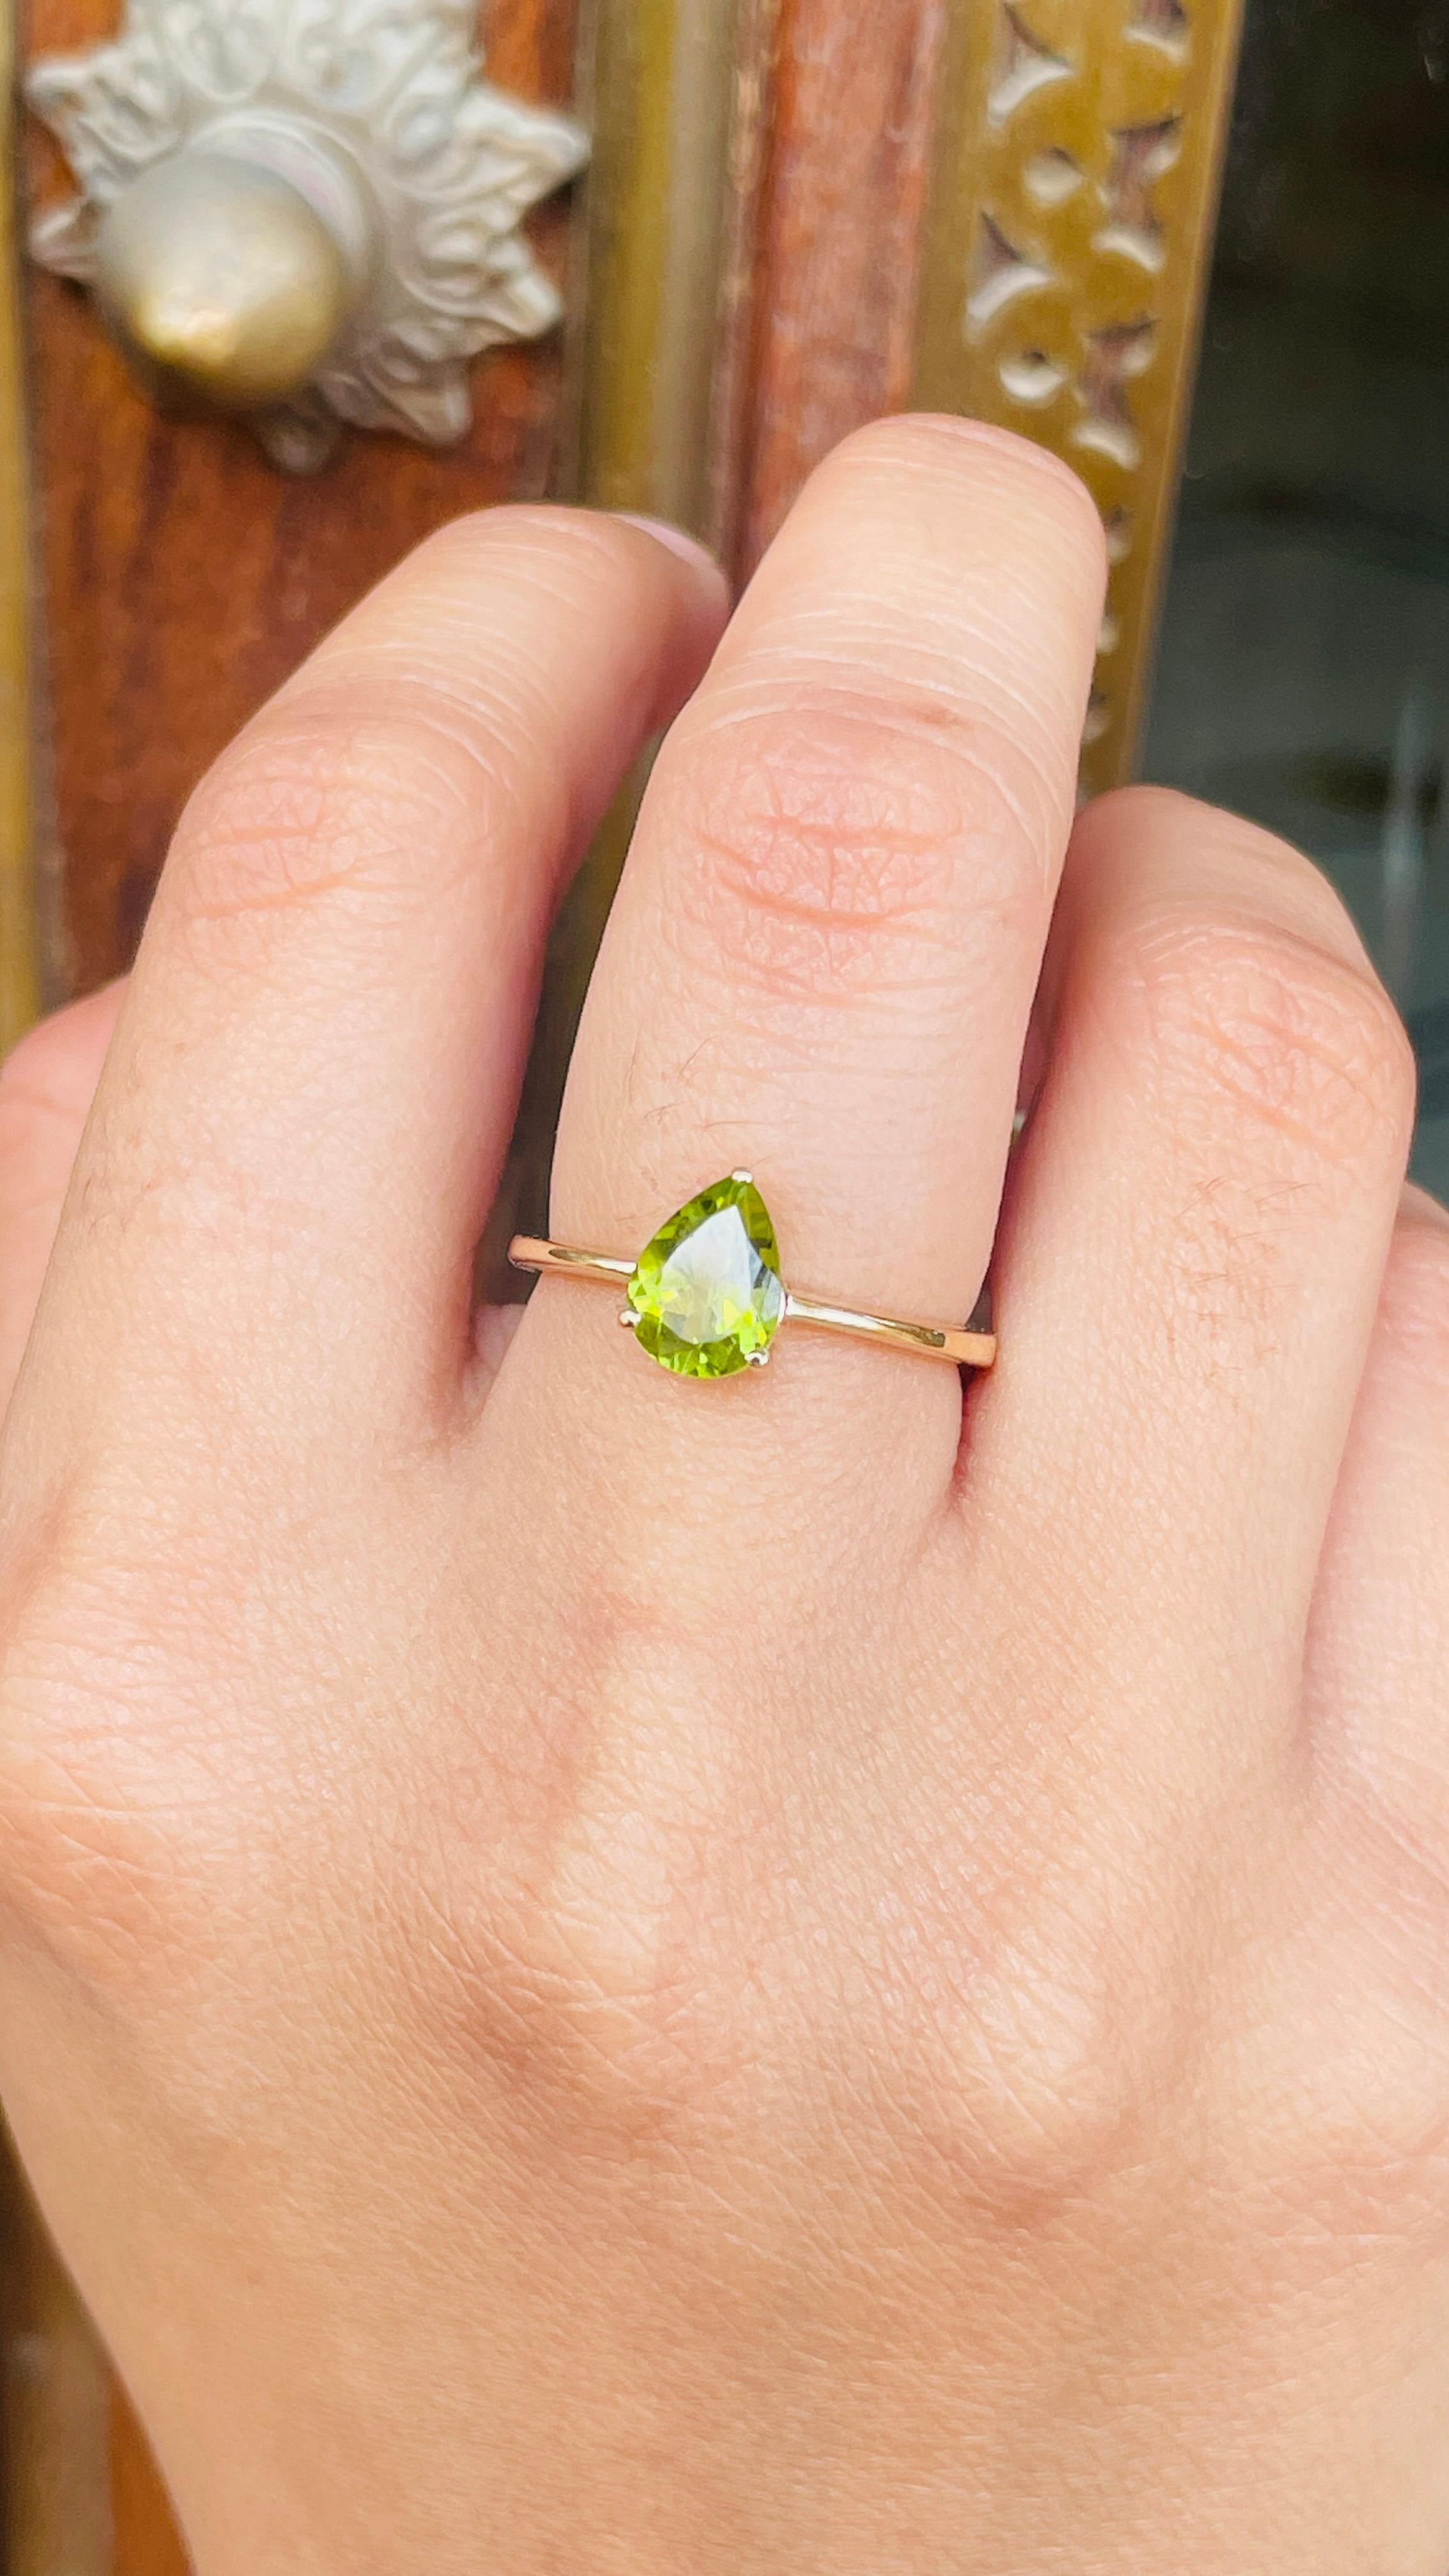 For Sale:  Pear Cut Peridot Solitaire Ring in 14K Yellow Gold 6